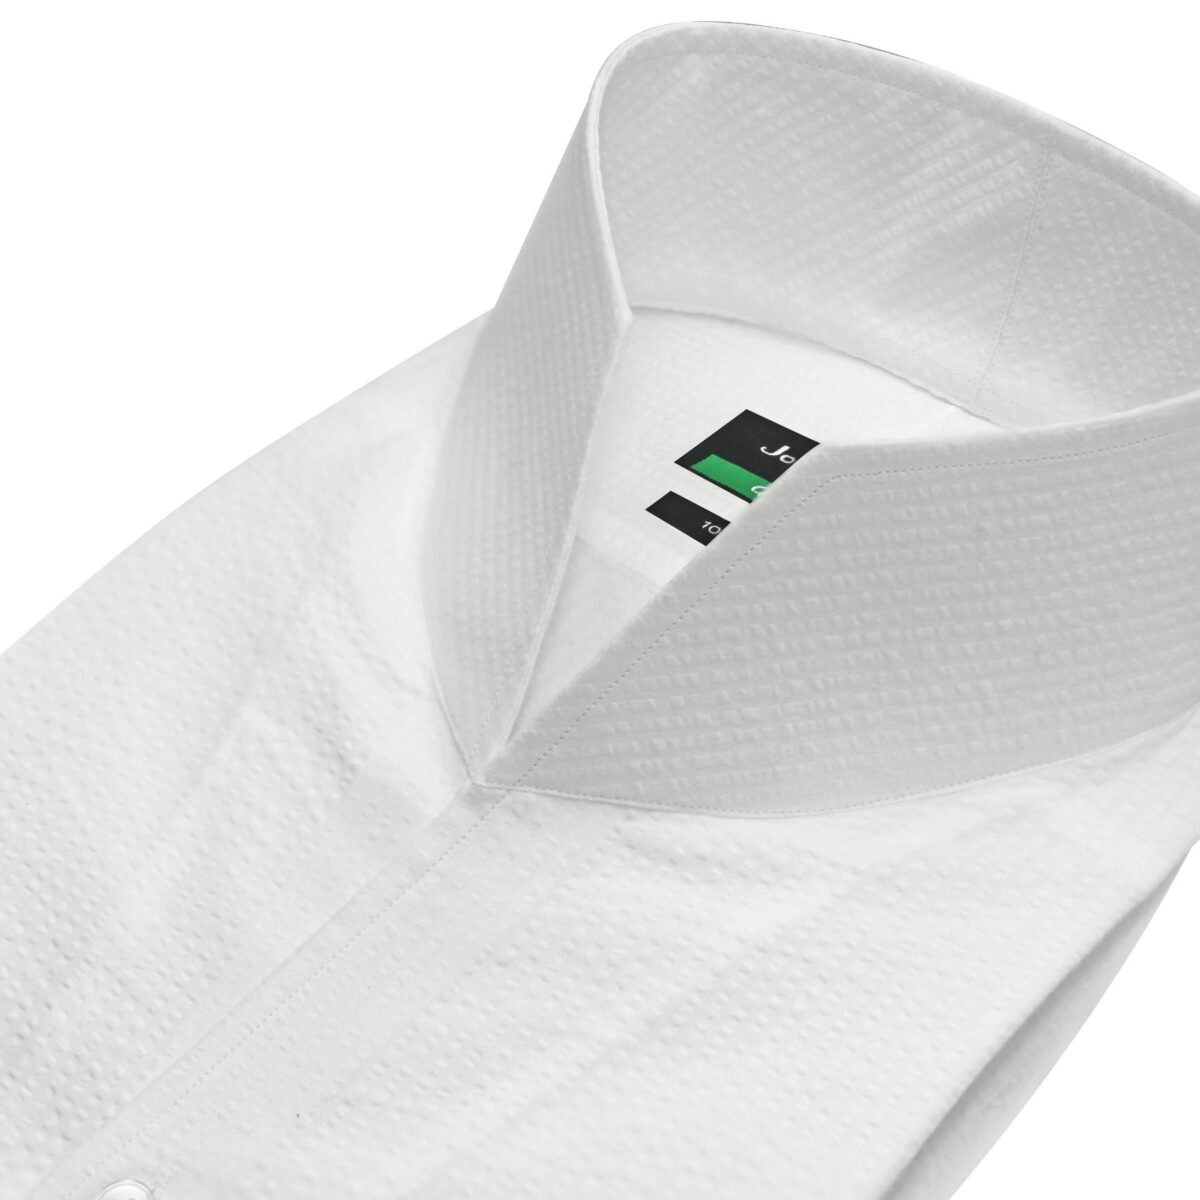 White Seersucker High Open Collar Shirts, 100% Cotton,Custom made shirts in your fit